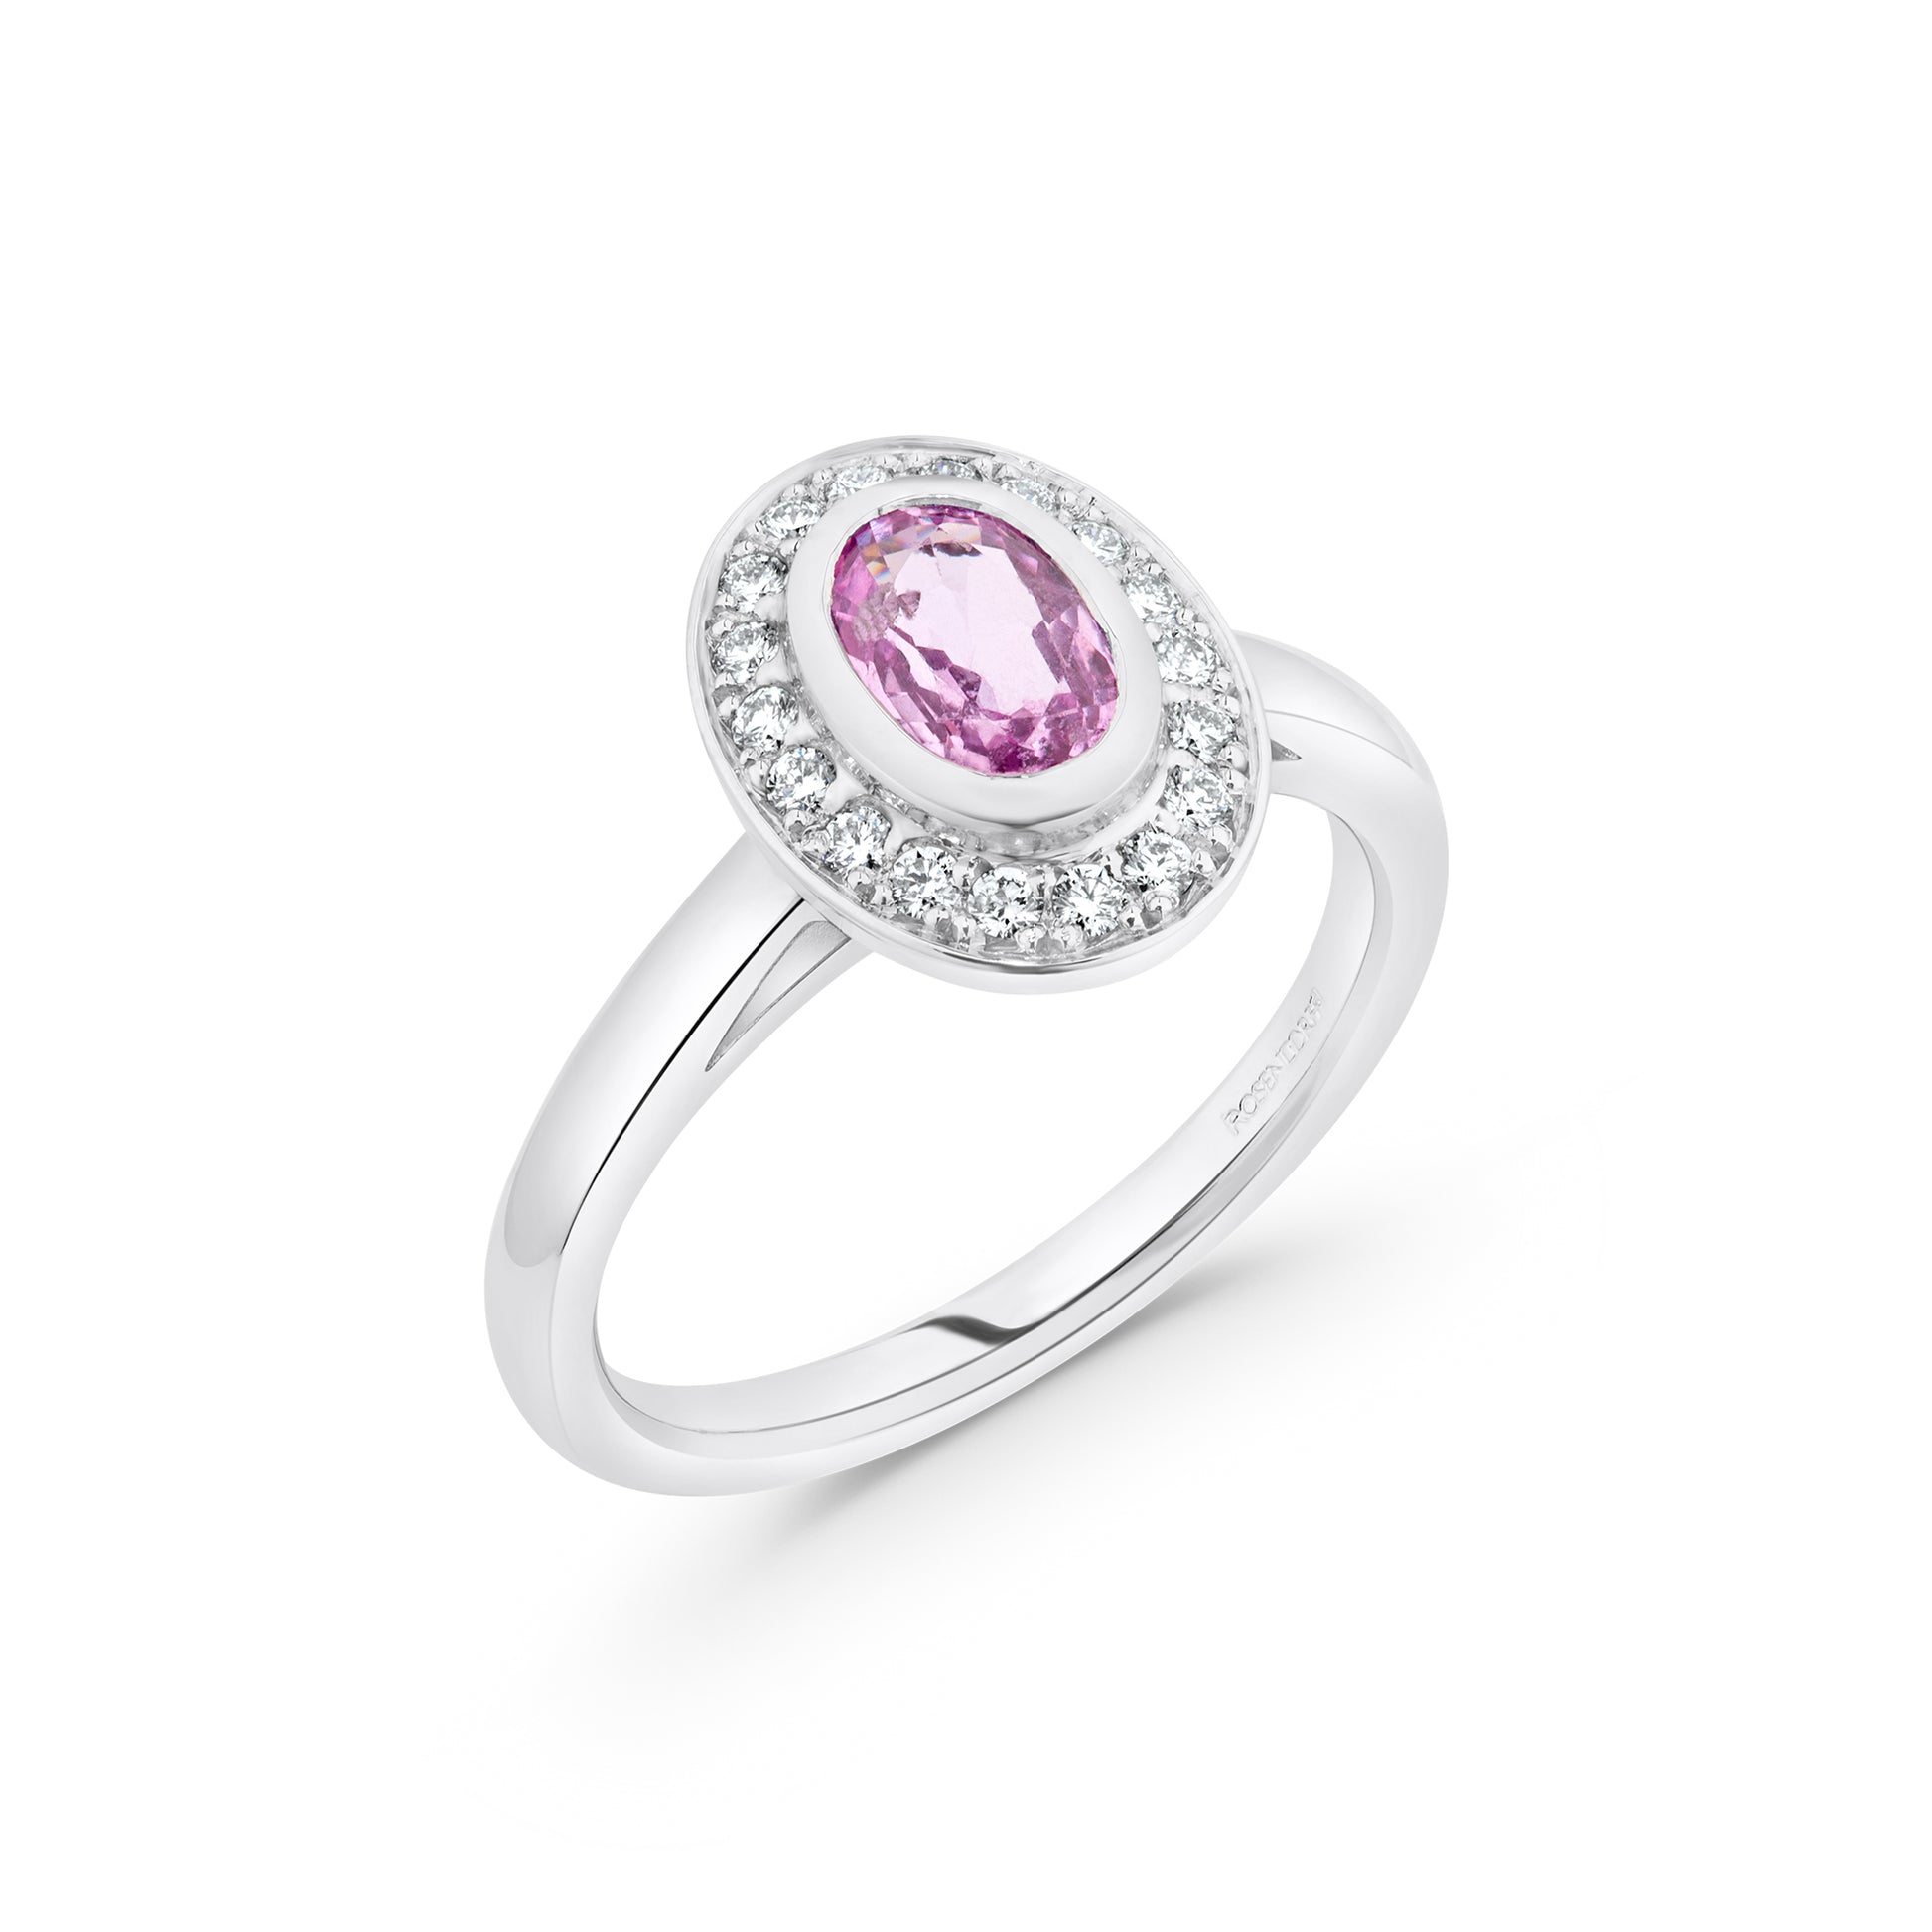 0.80ct Oval Pink Sapphire Bezel Halo Ring